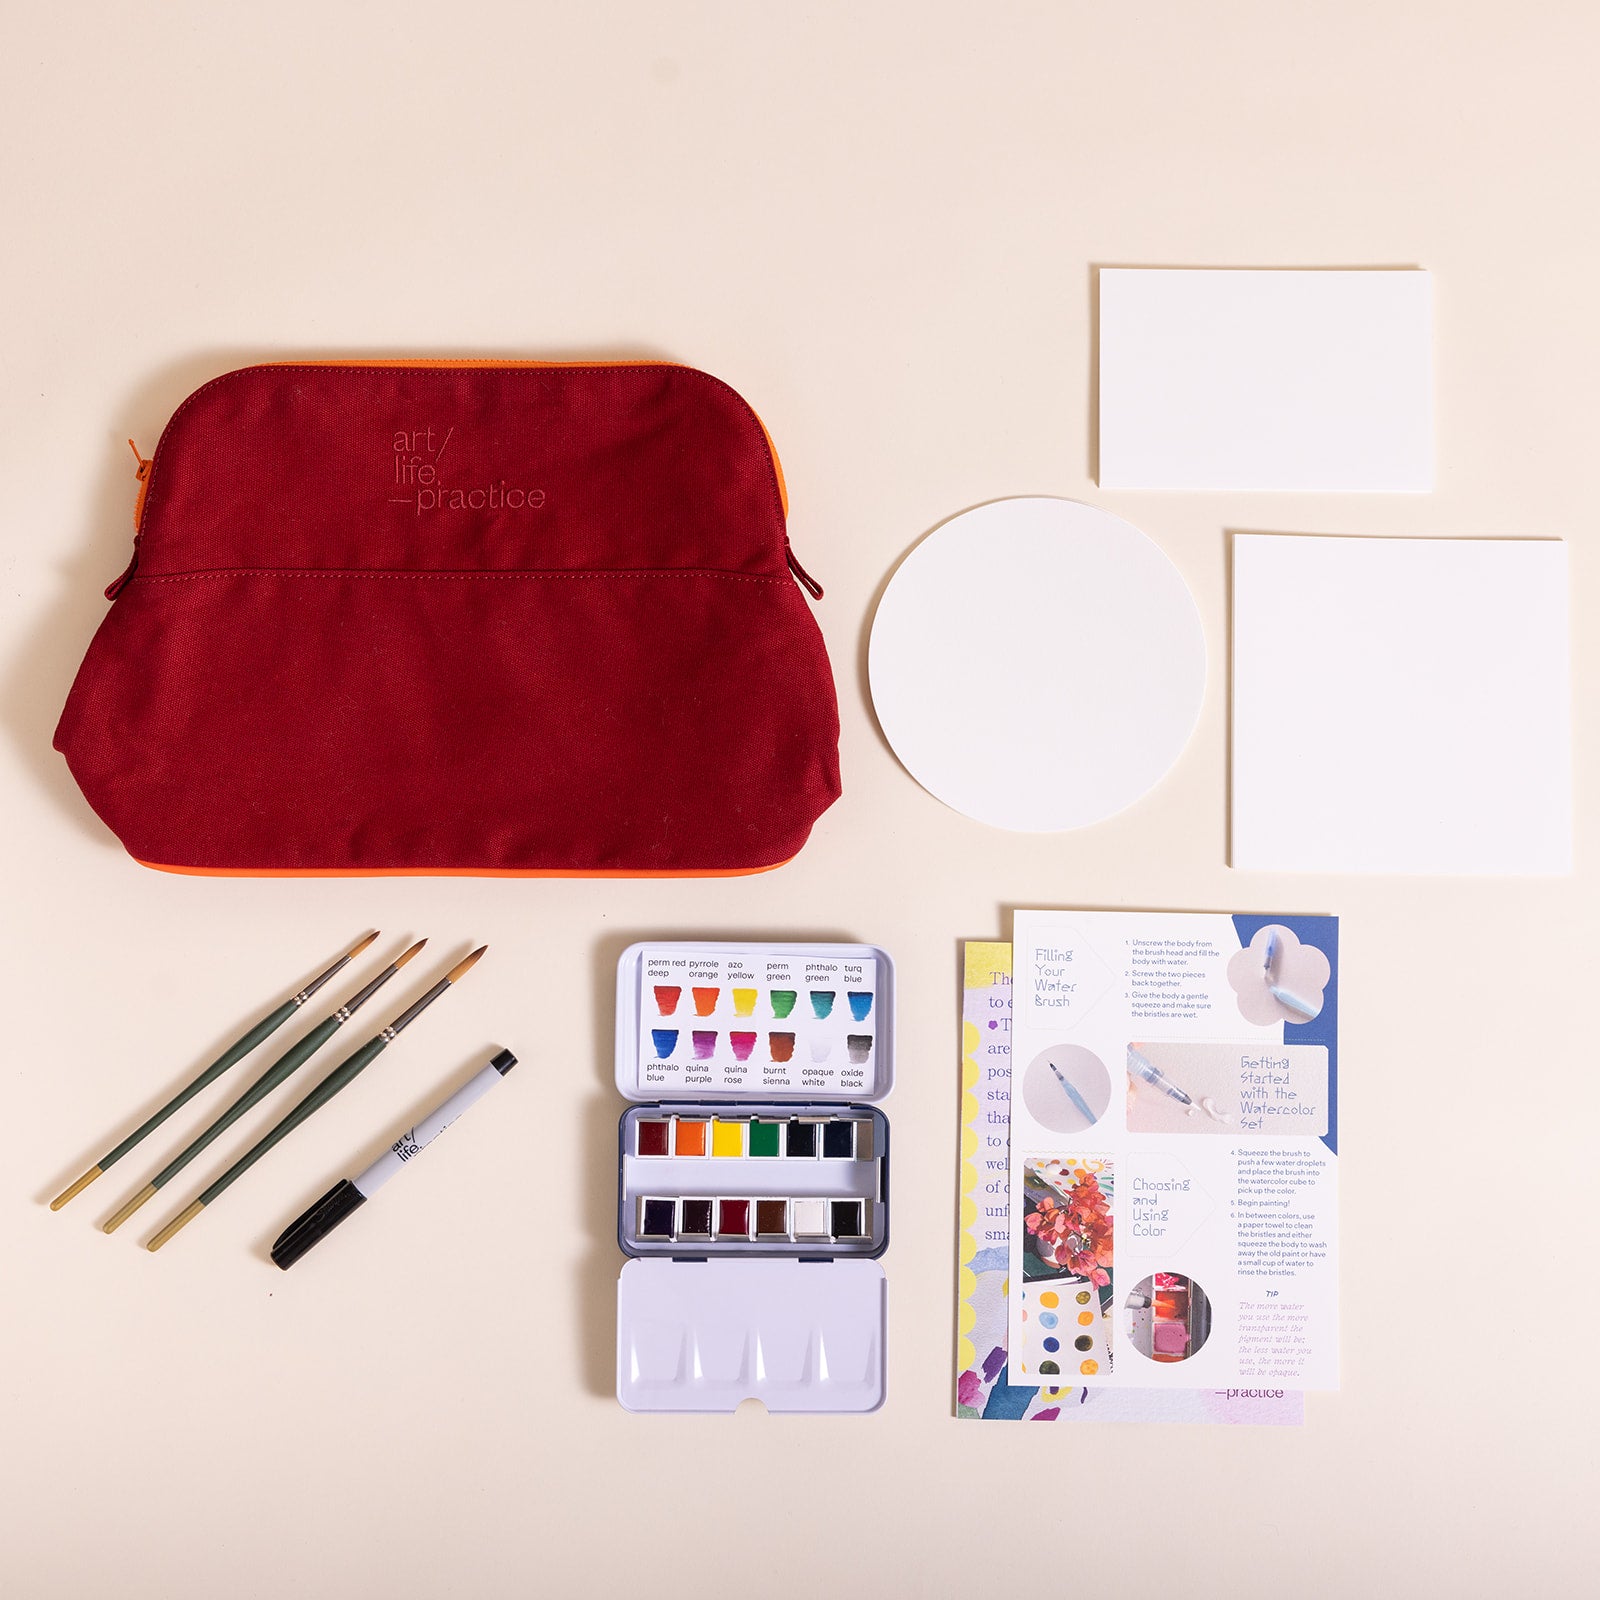 Uses for the white in a watercolor set? : r/learnart